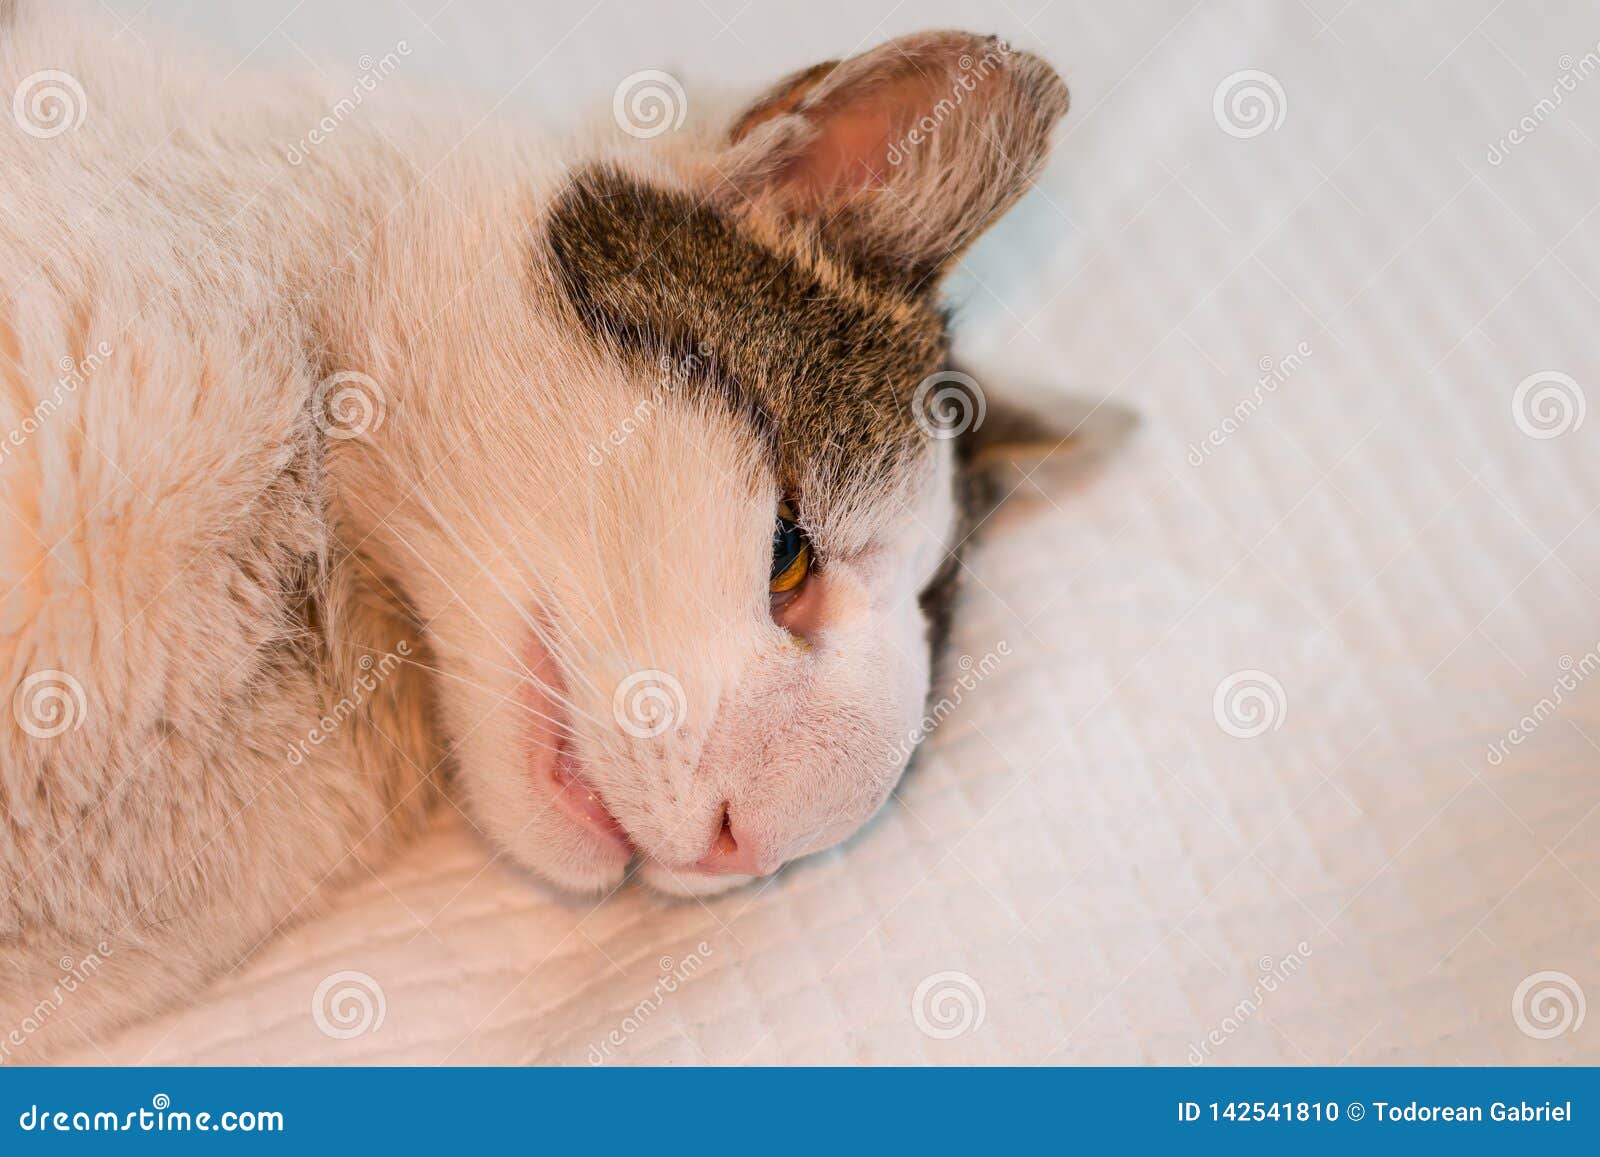 Cat With Nasal Tumor Royalty Free Stock Photography